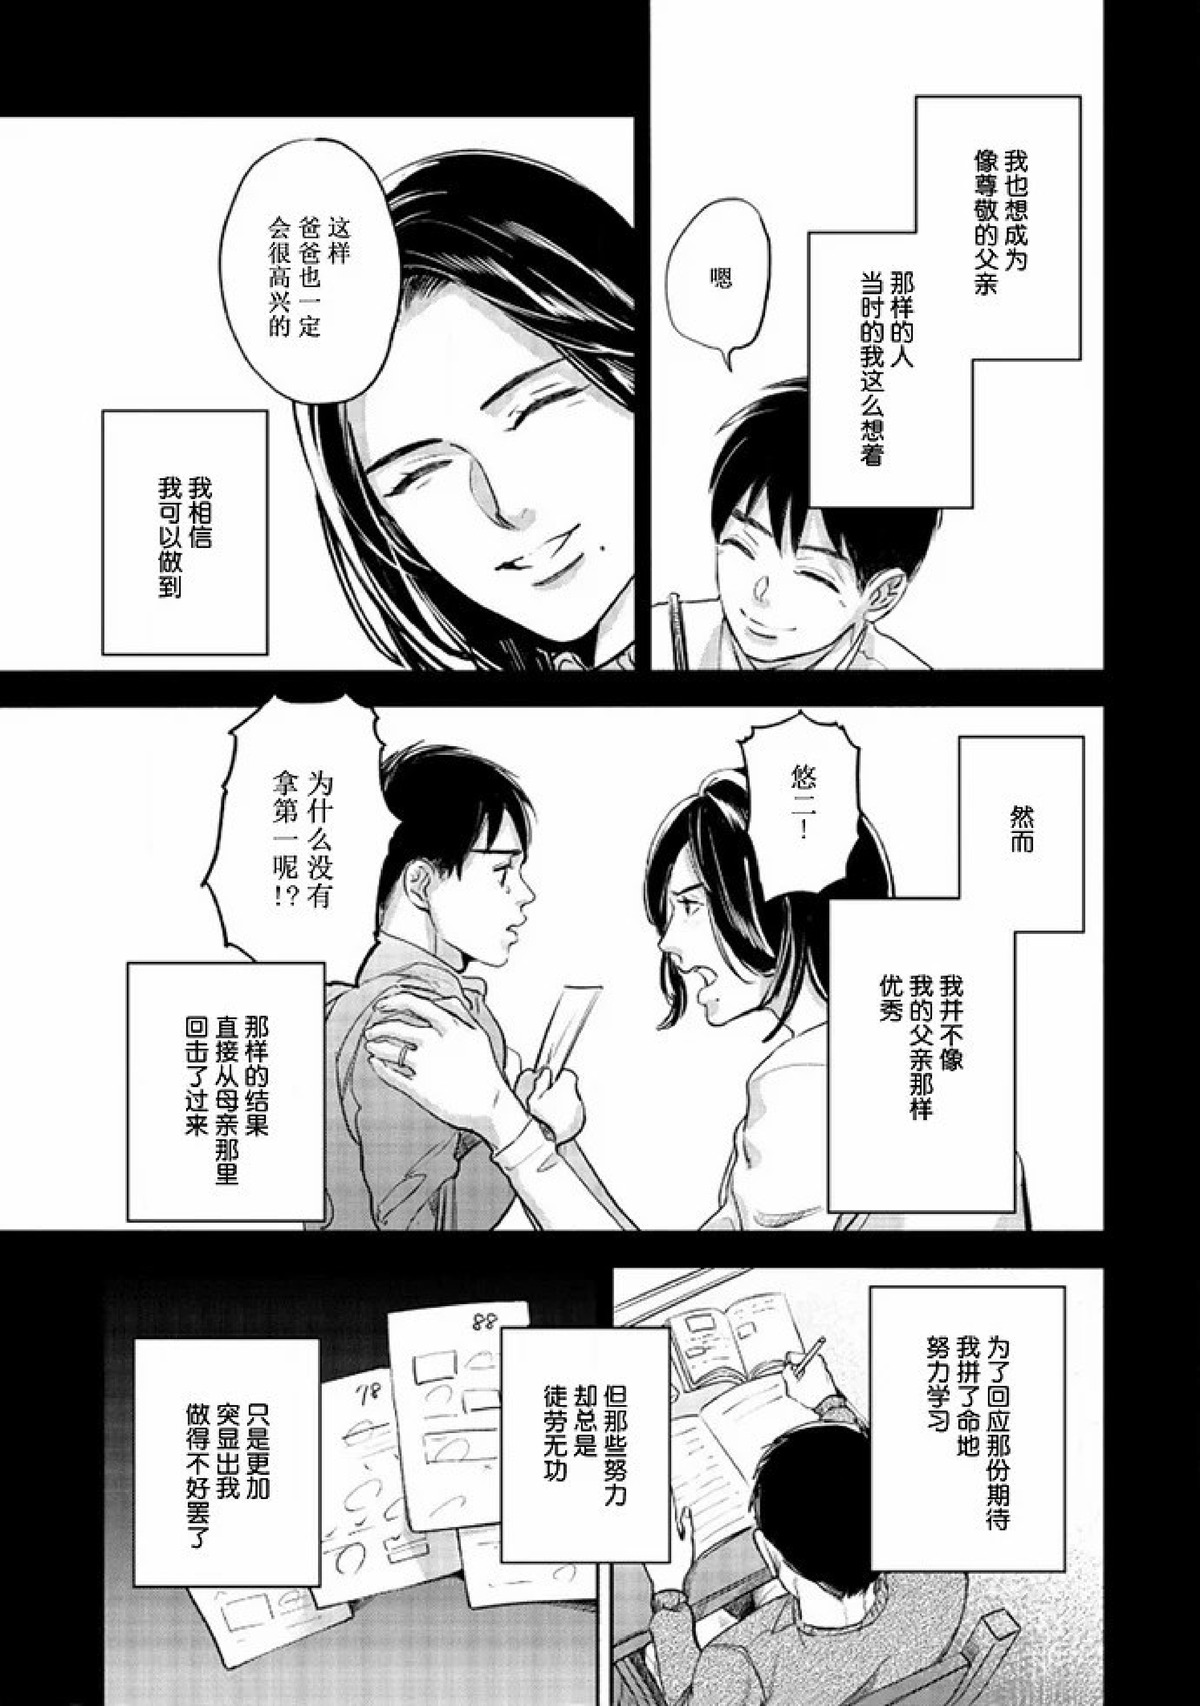 【Two sides of the same coin[腐漫]】漫画-（上卷01-02）章节漫画下拉式图片-21.jpg